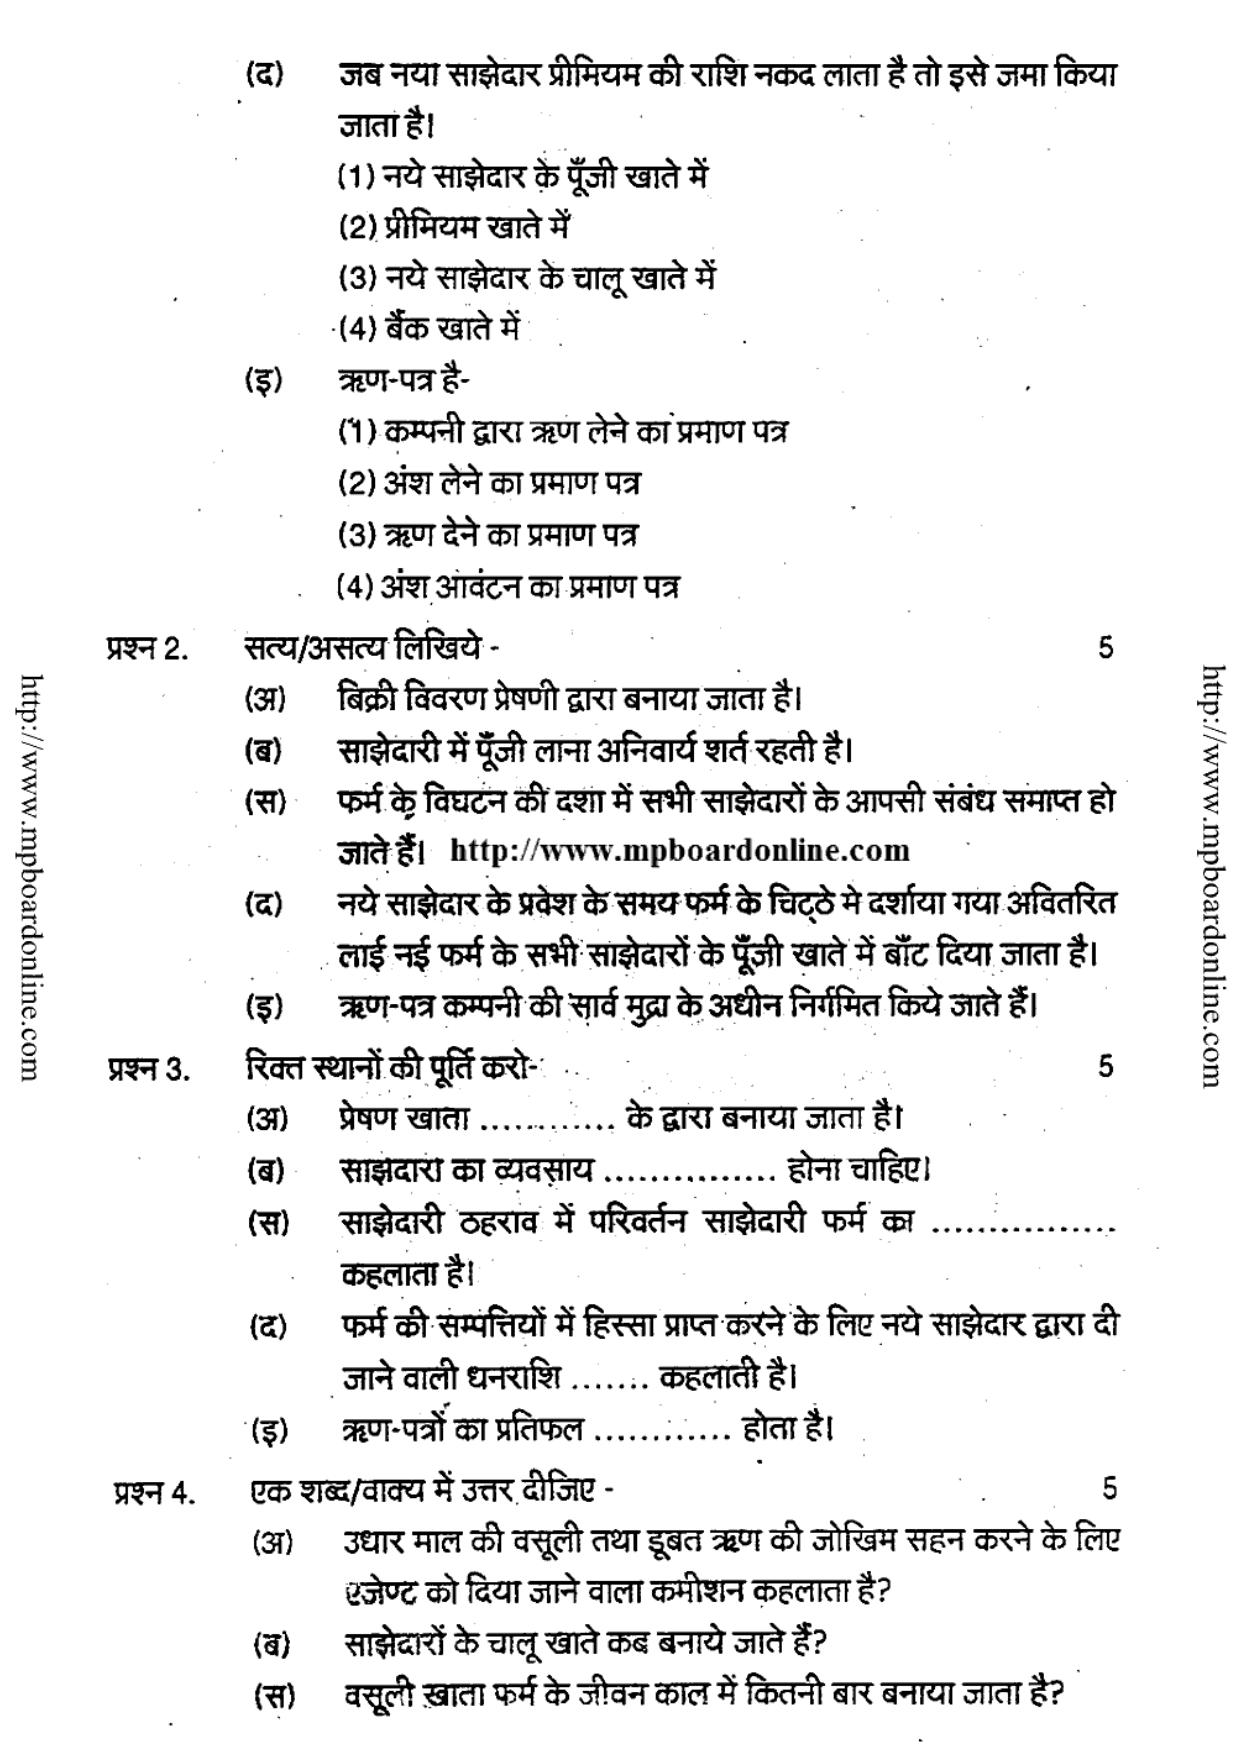 MP Board Class 12 Book Keeping And Accountancy 2018 Question Paper - Page 8